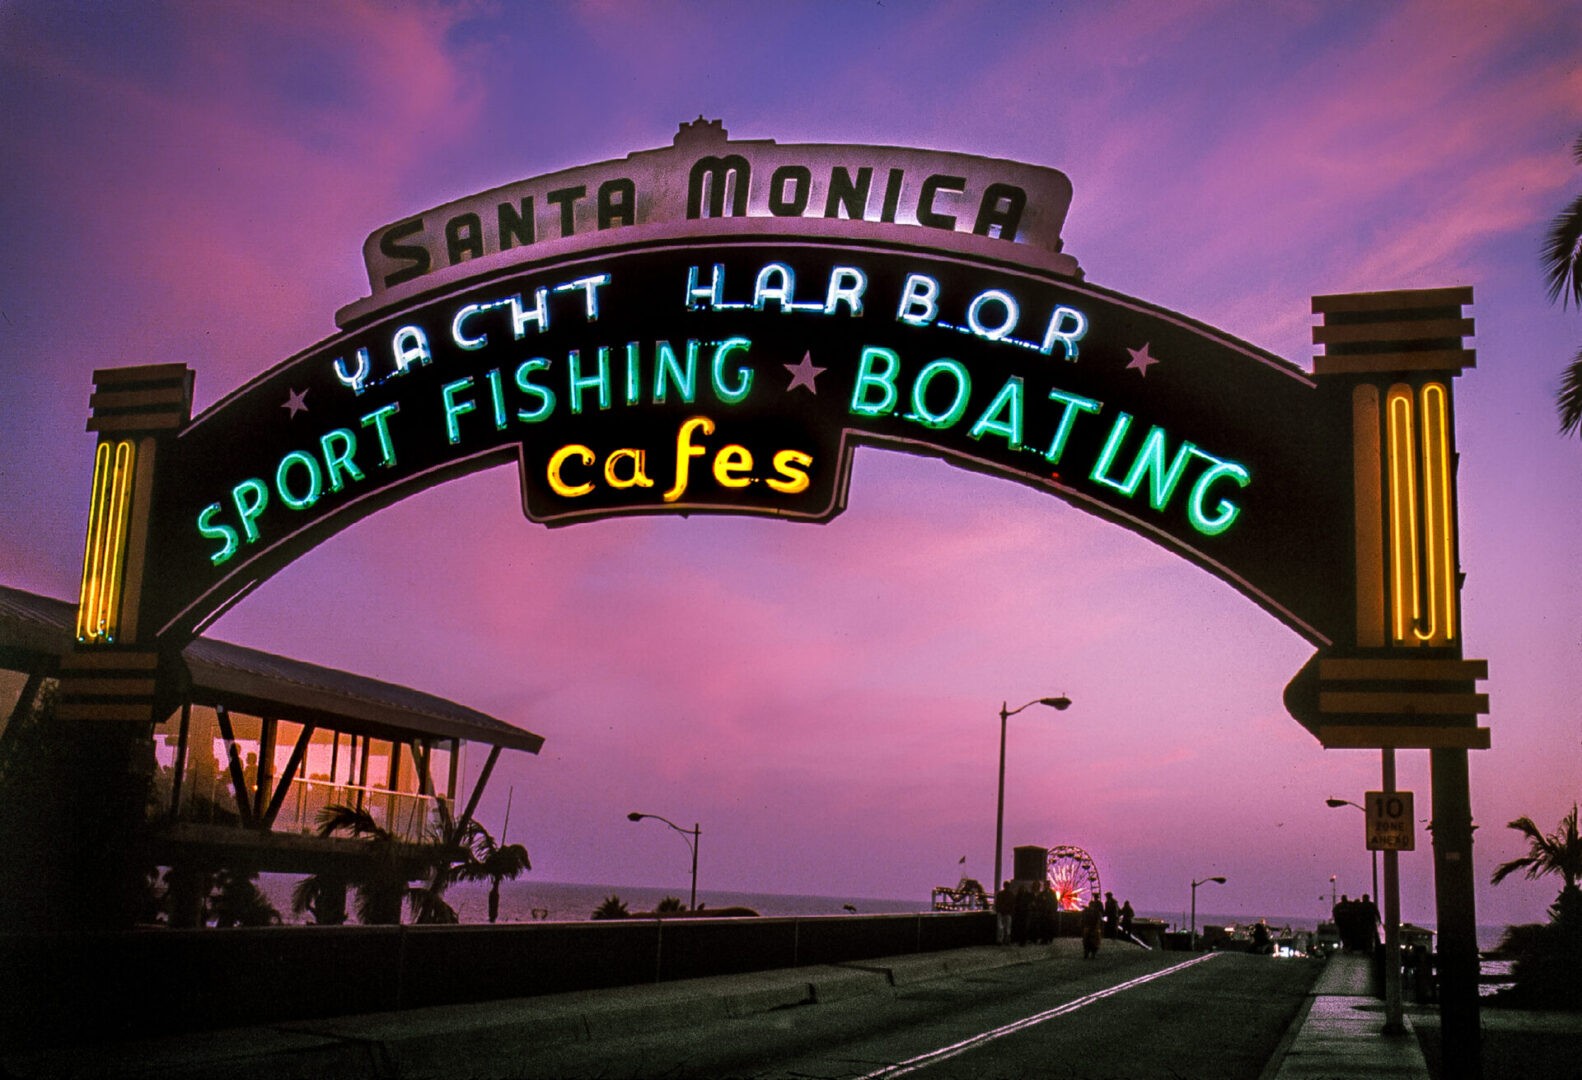 Final stop in Route 66 Start to Finish, the Santa Monica Pier at dusk with the neon sign welcoming you to the pier.